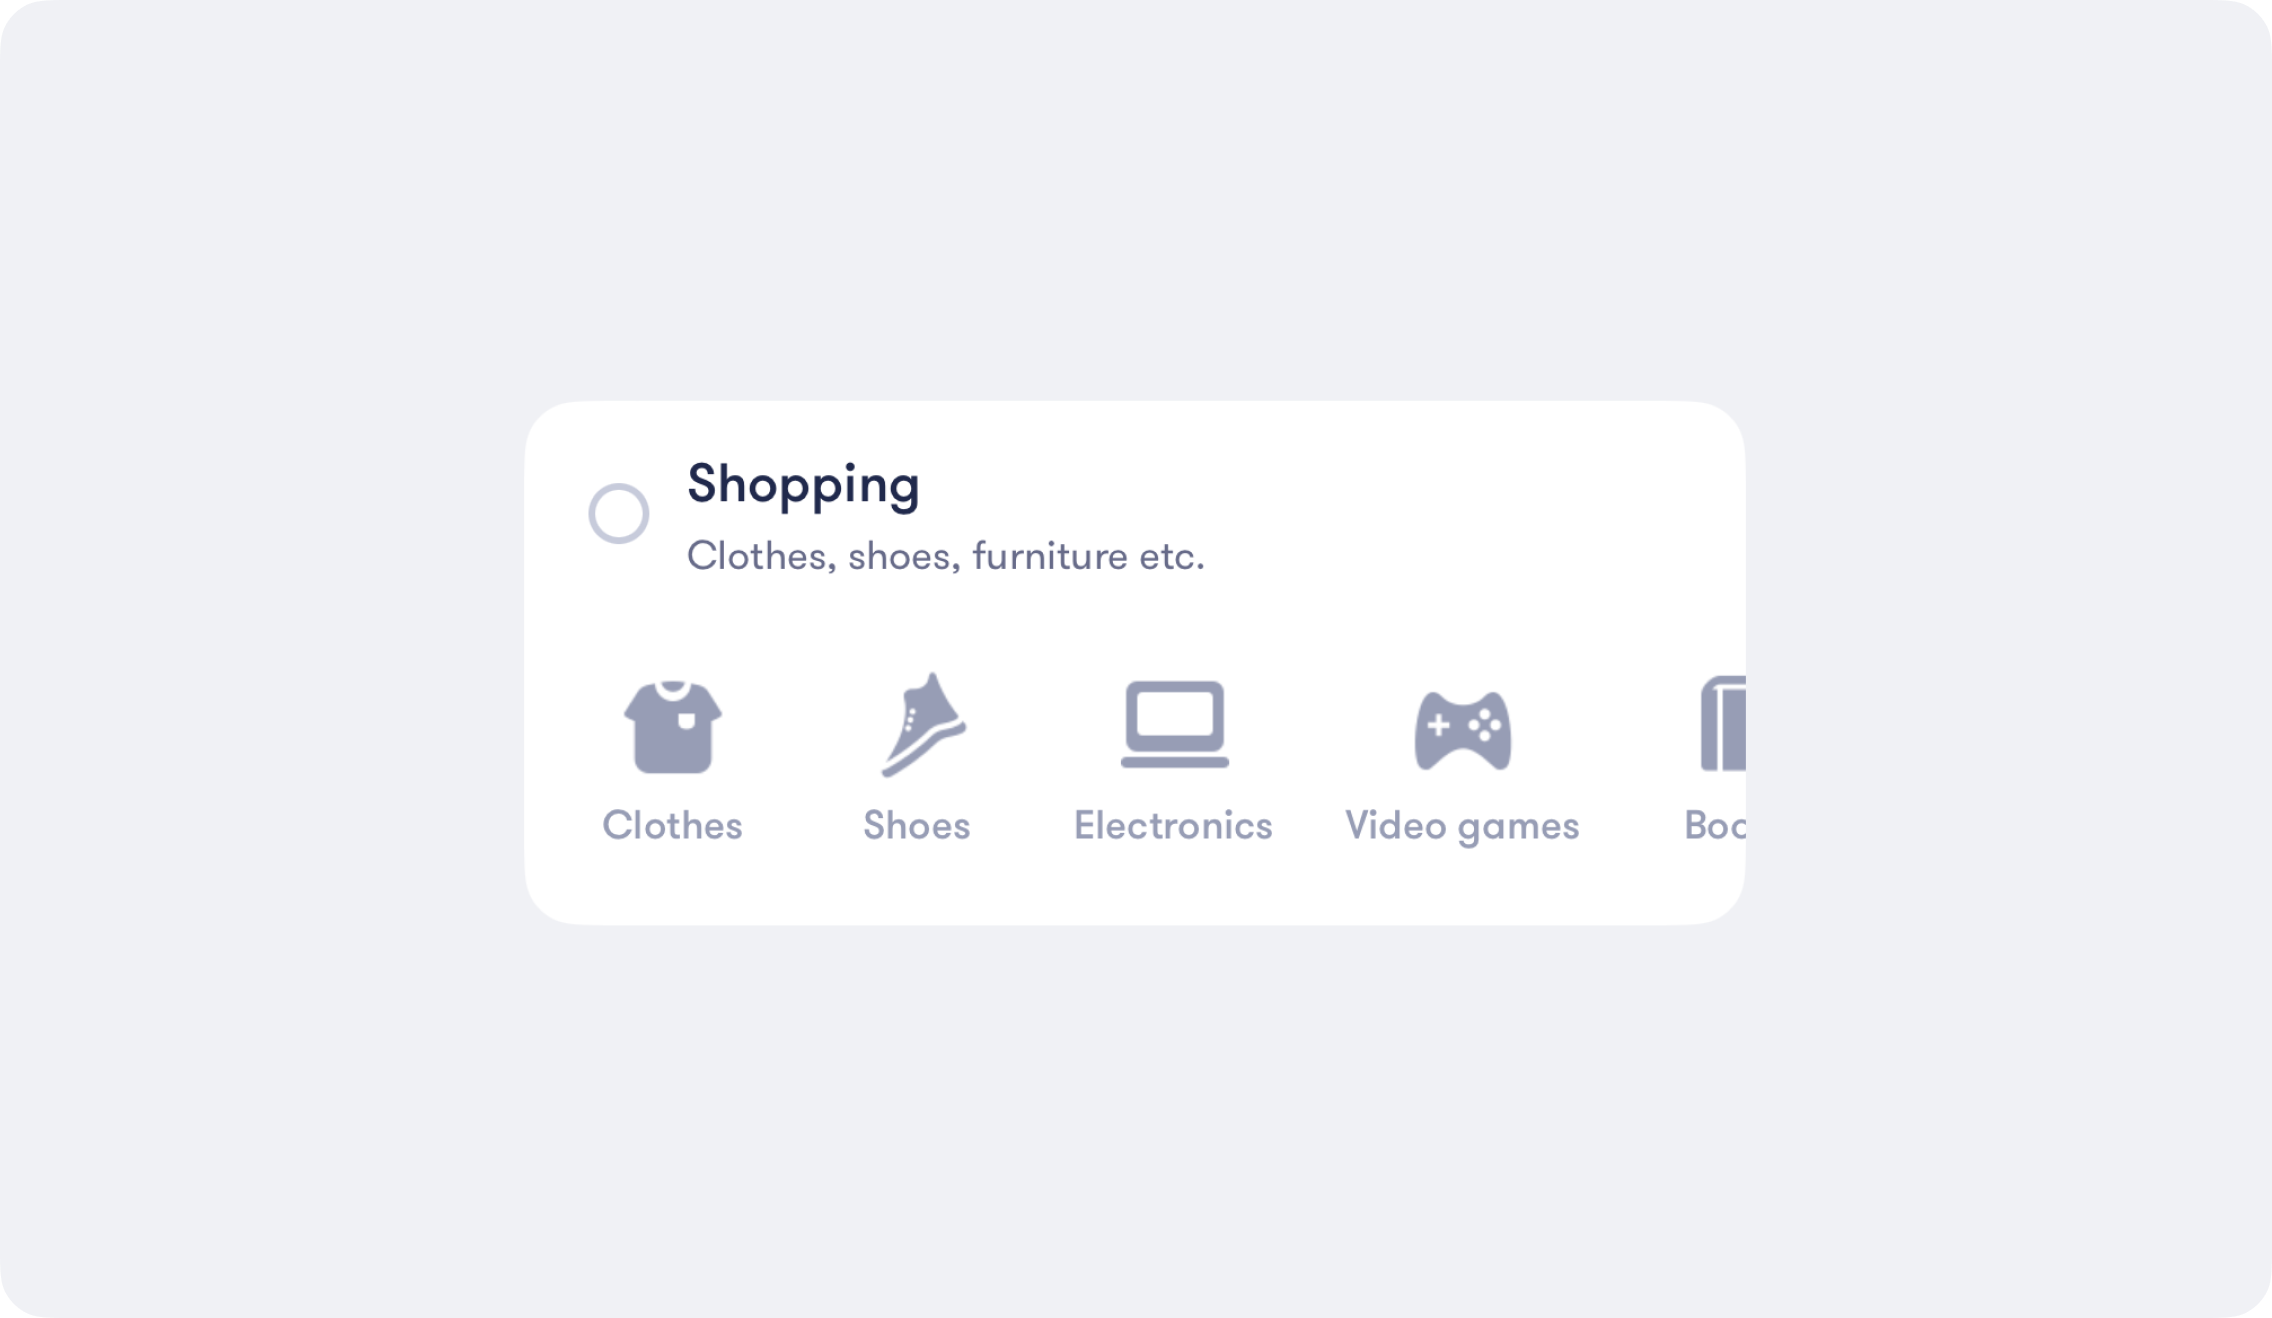 Illustration showing Shopping tag item from Fold app. it shows different icons like clothes, shoes, electronics video games etc which can be associated with Shopping tag